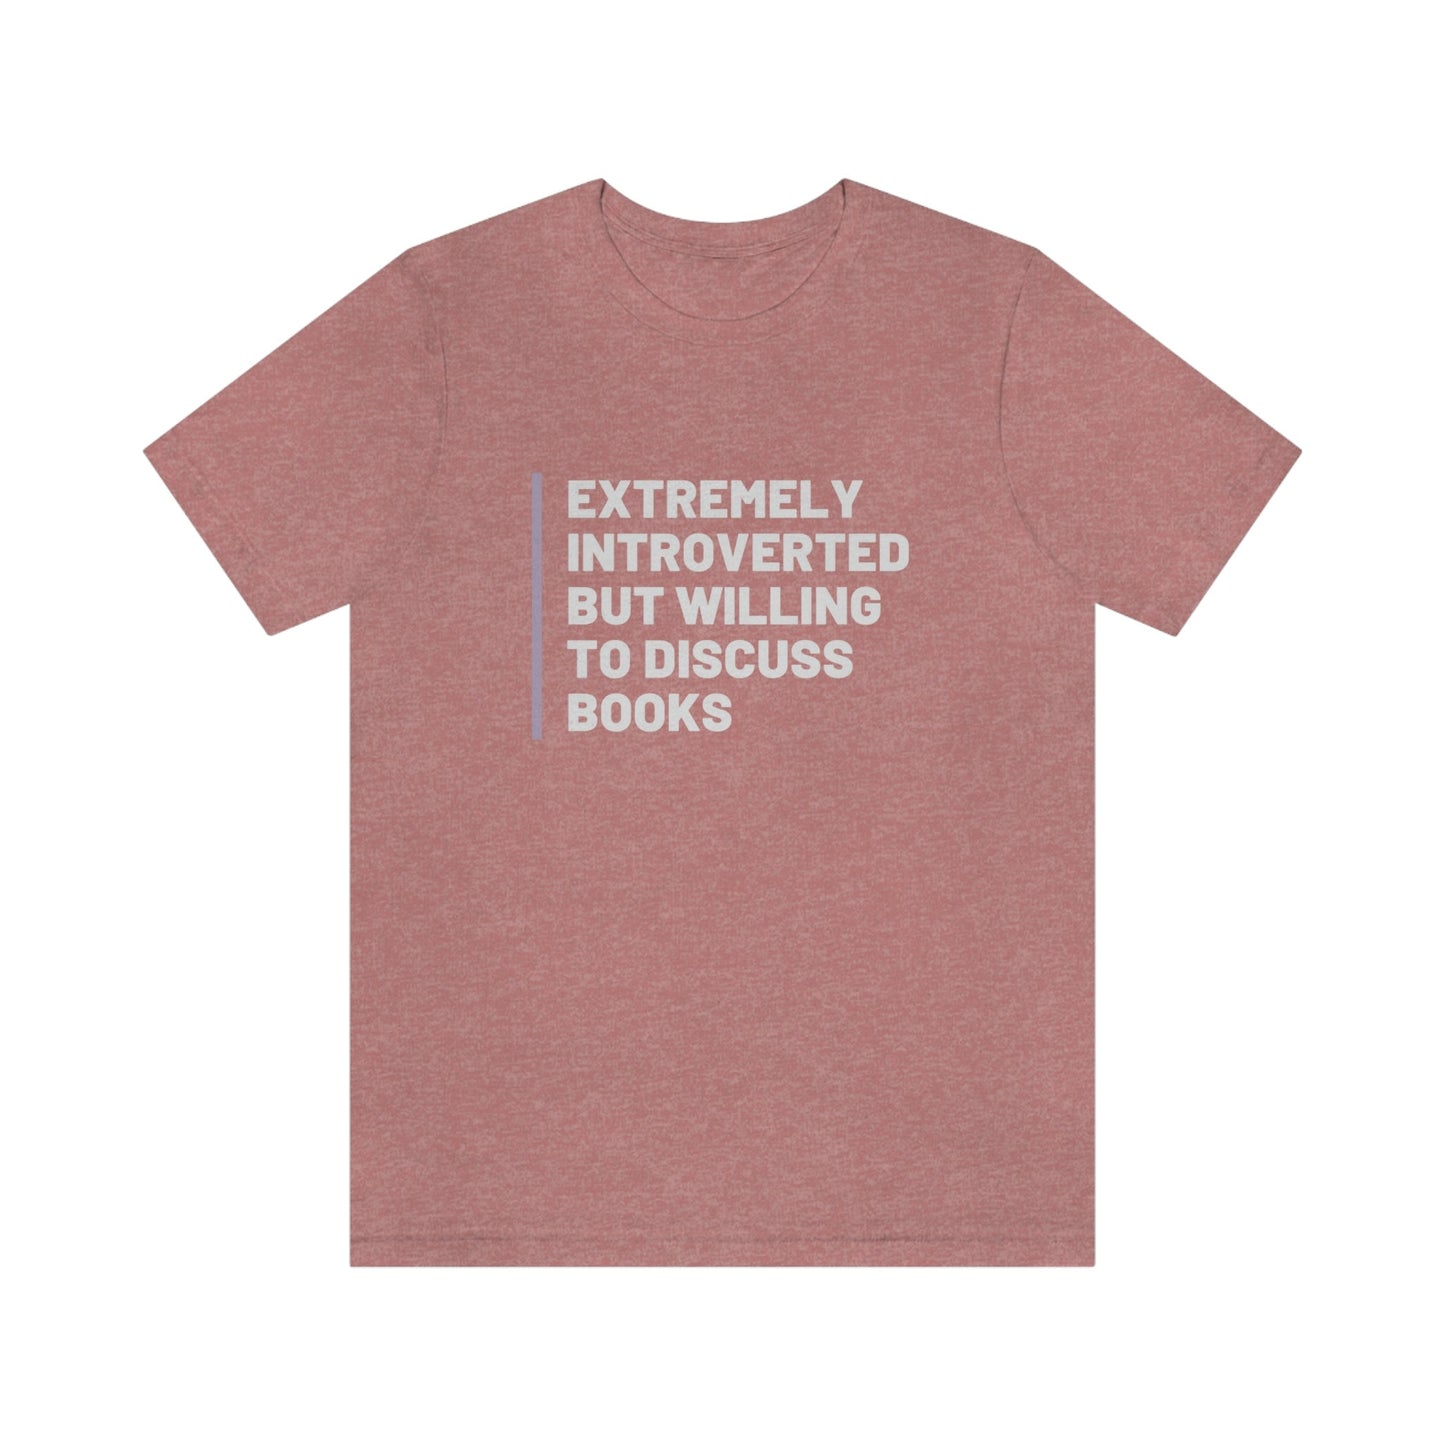 Introverted But Willing to Discuss Books Shirt